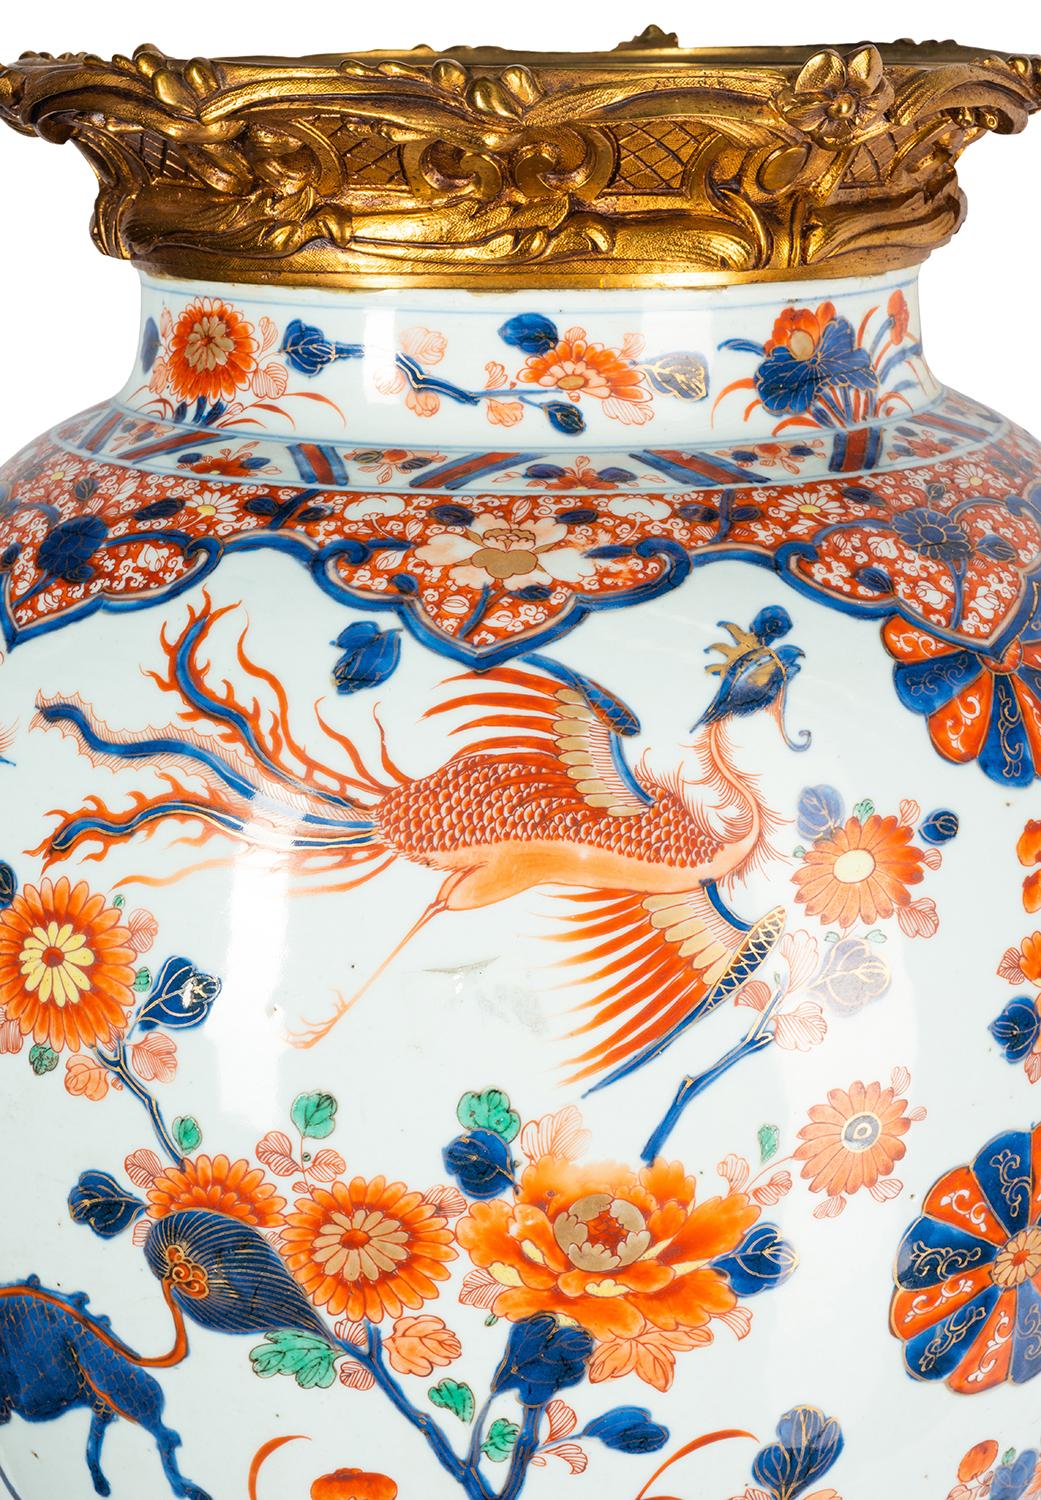 A wonderful early 18th century Chinese Imari lidded vase with fabulous gilded ormolu rococo style scrolling foliate mounts to the neck and stand. The classical hand painted blue and orange Imari colours, depicting various motifs, exotic mythical